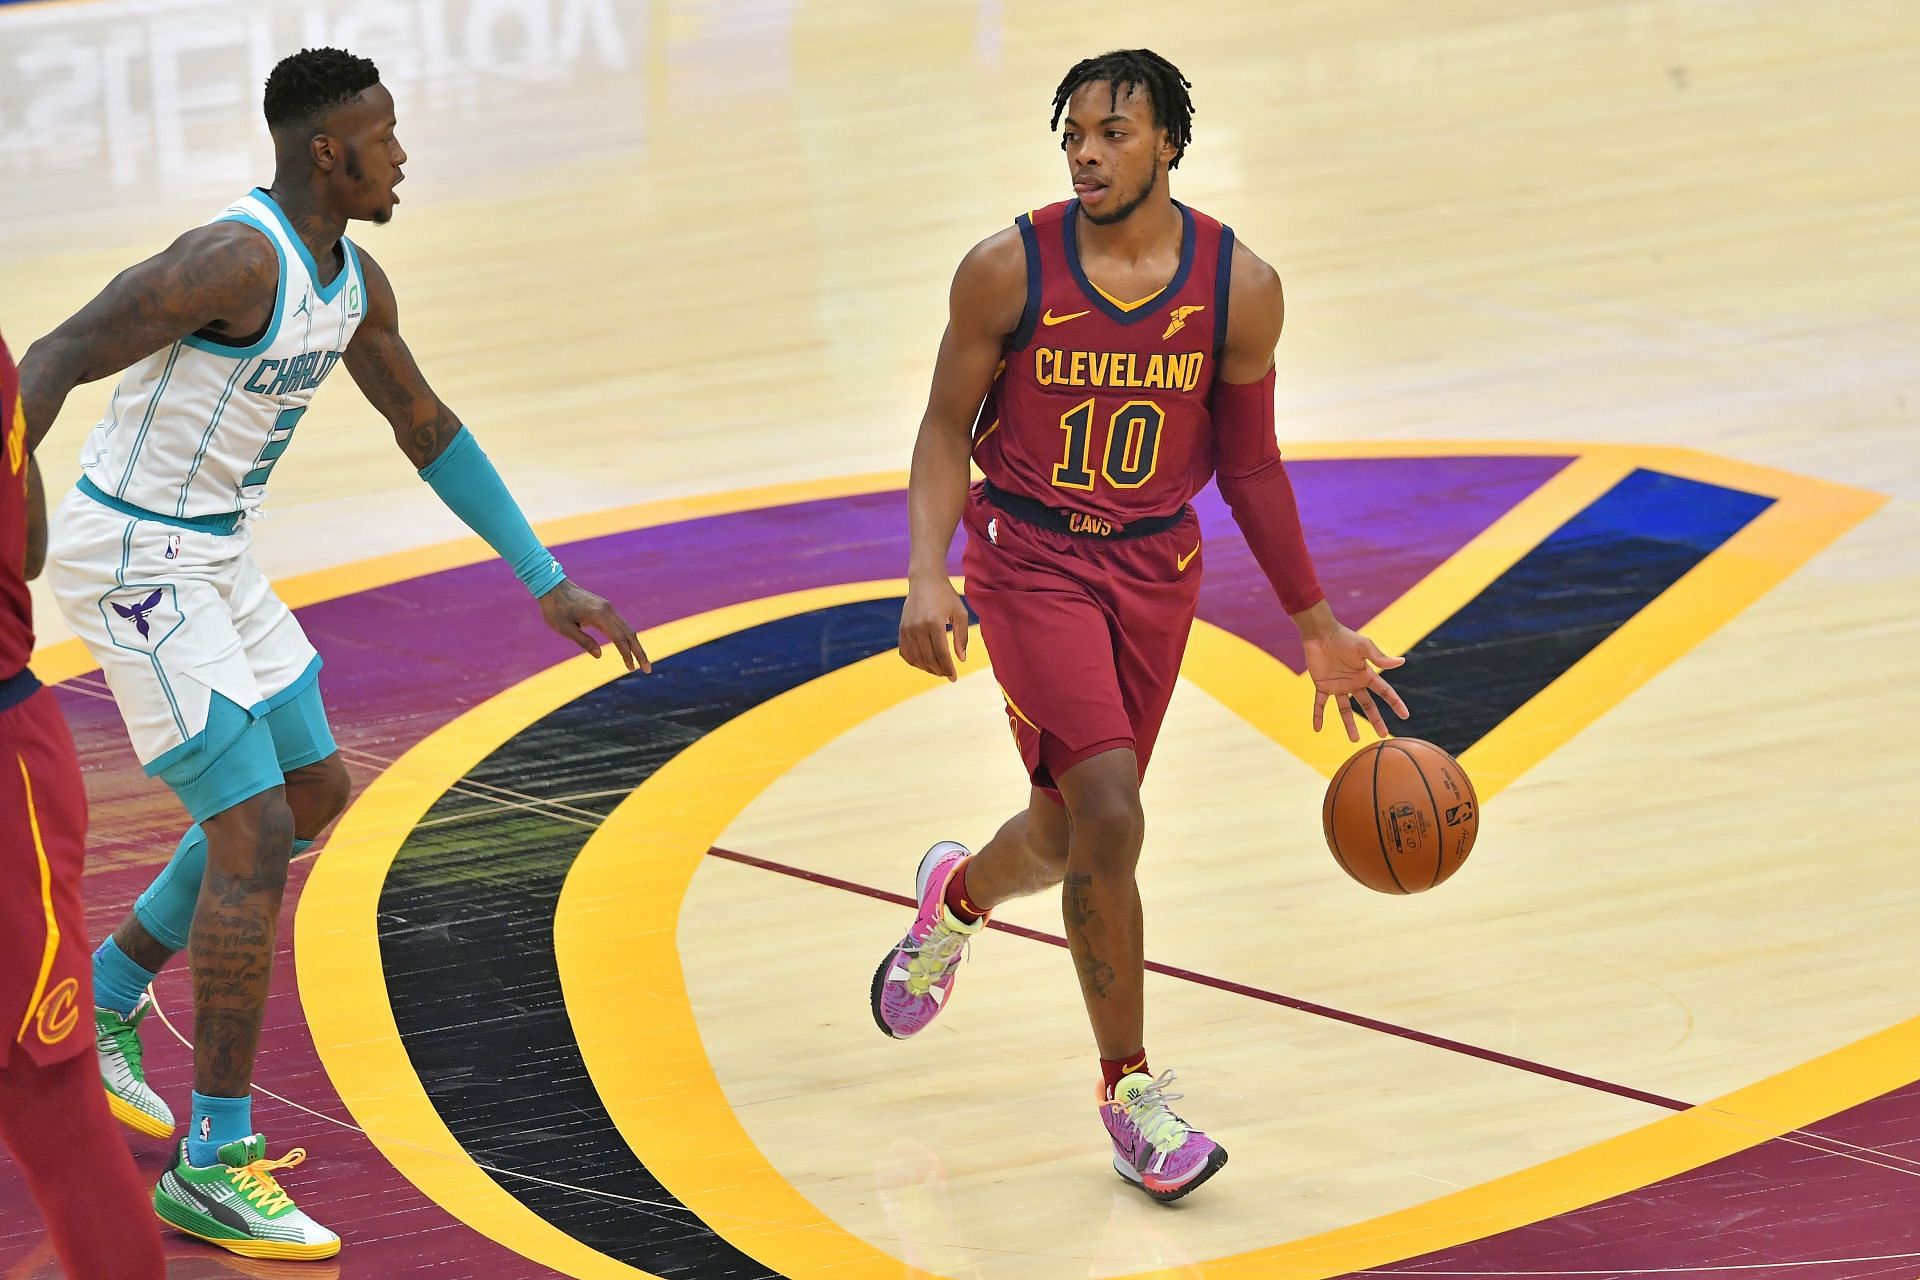 The Cleveland Cavaliers will play their home opener against the Charlotte Hornets on Friday at the Rocket Mortgage Fieldhouse in Cleveland, OH